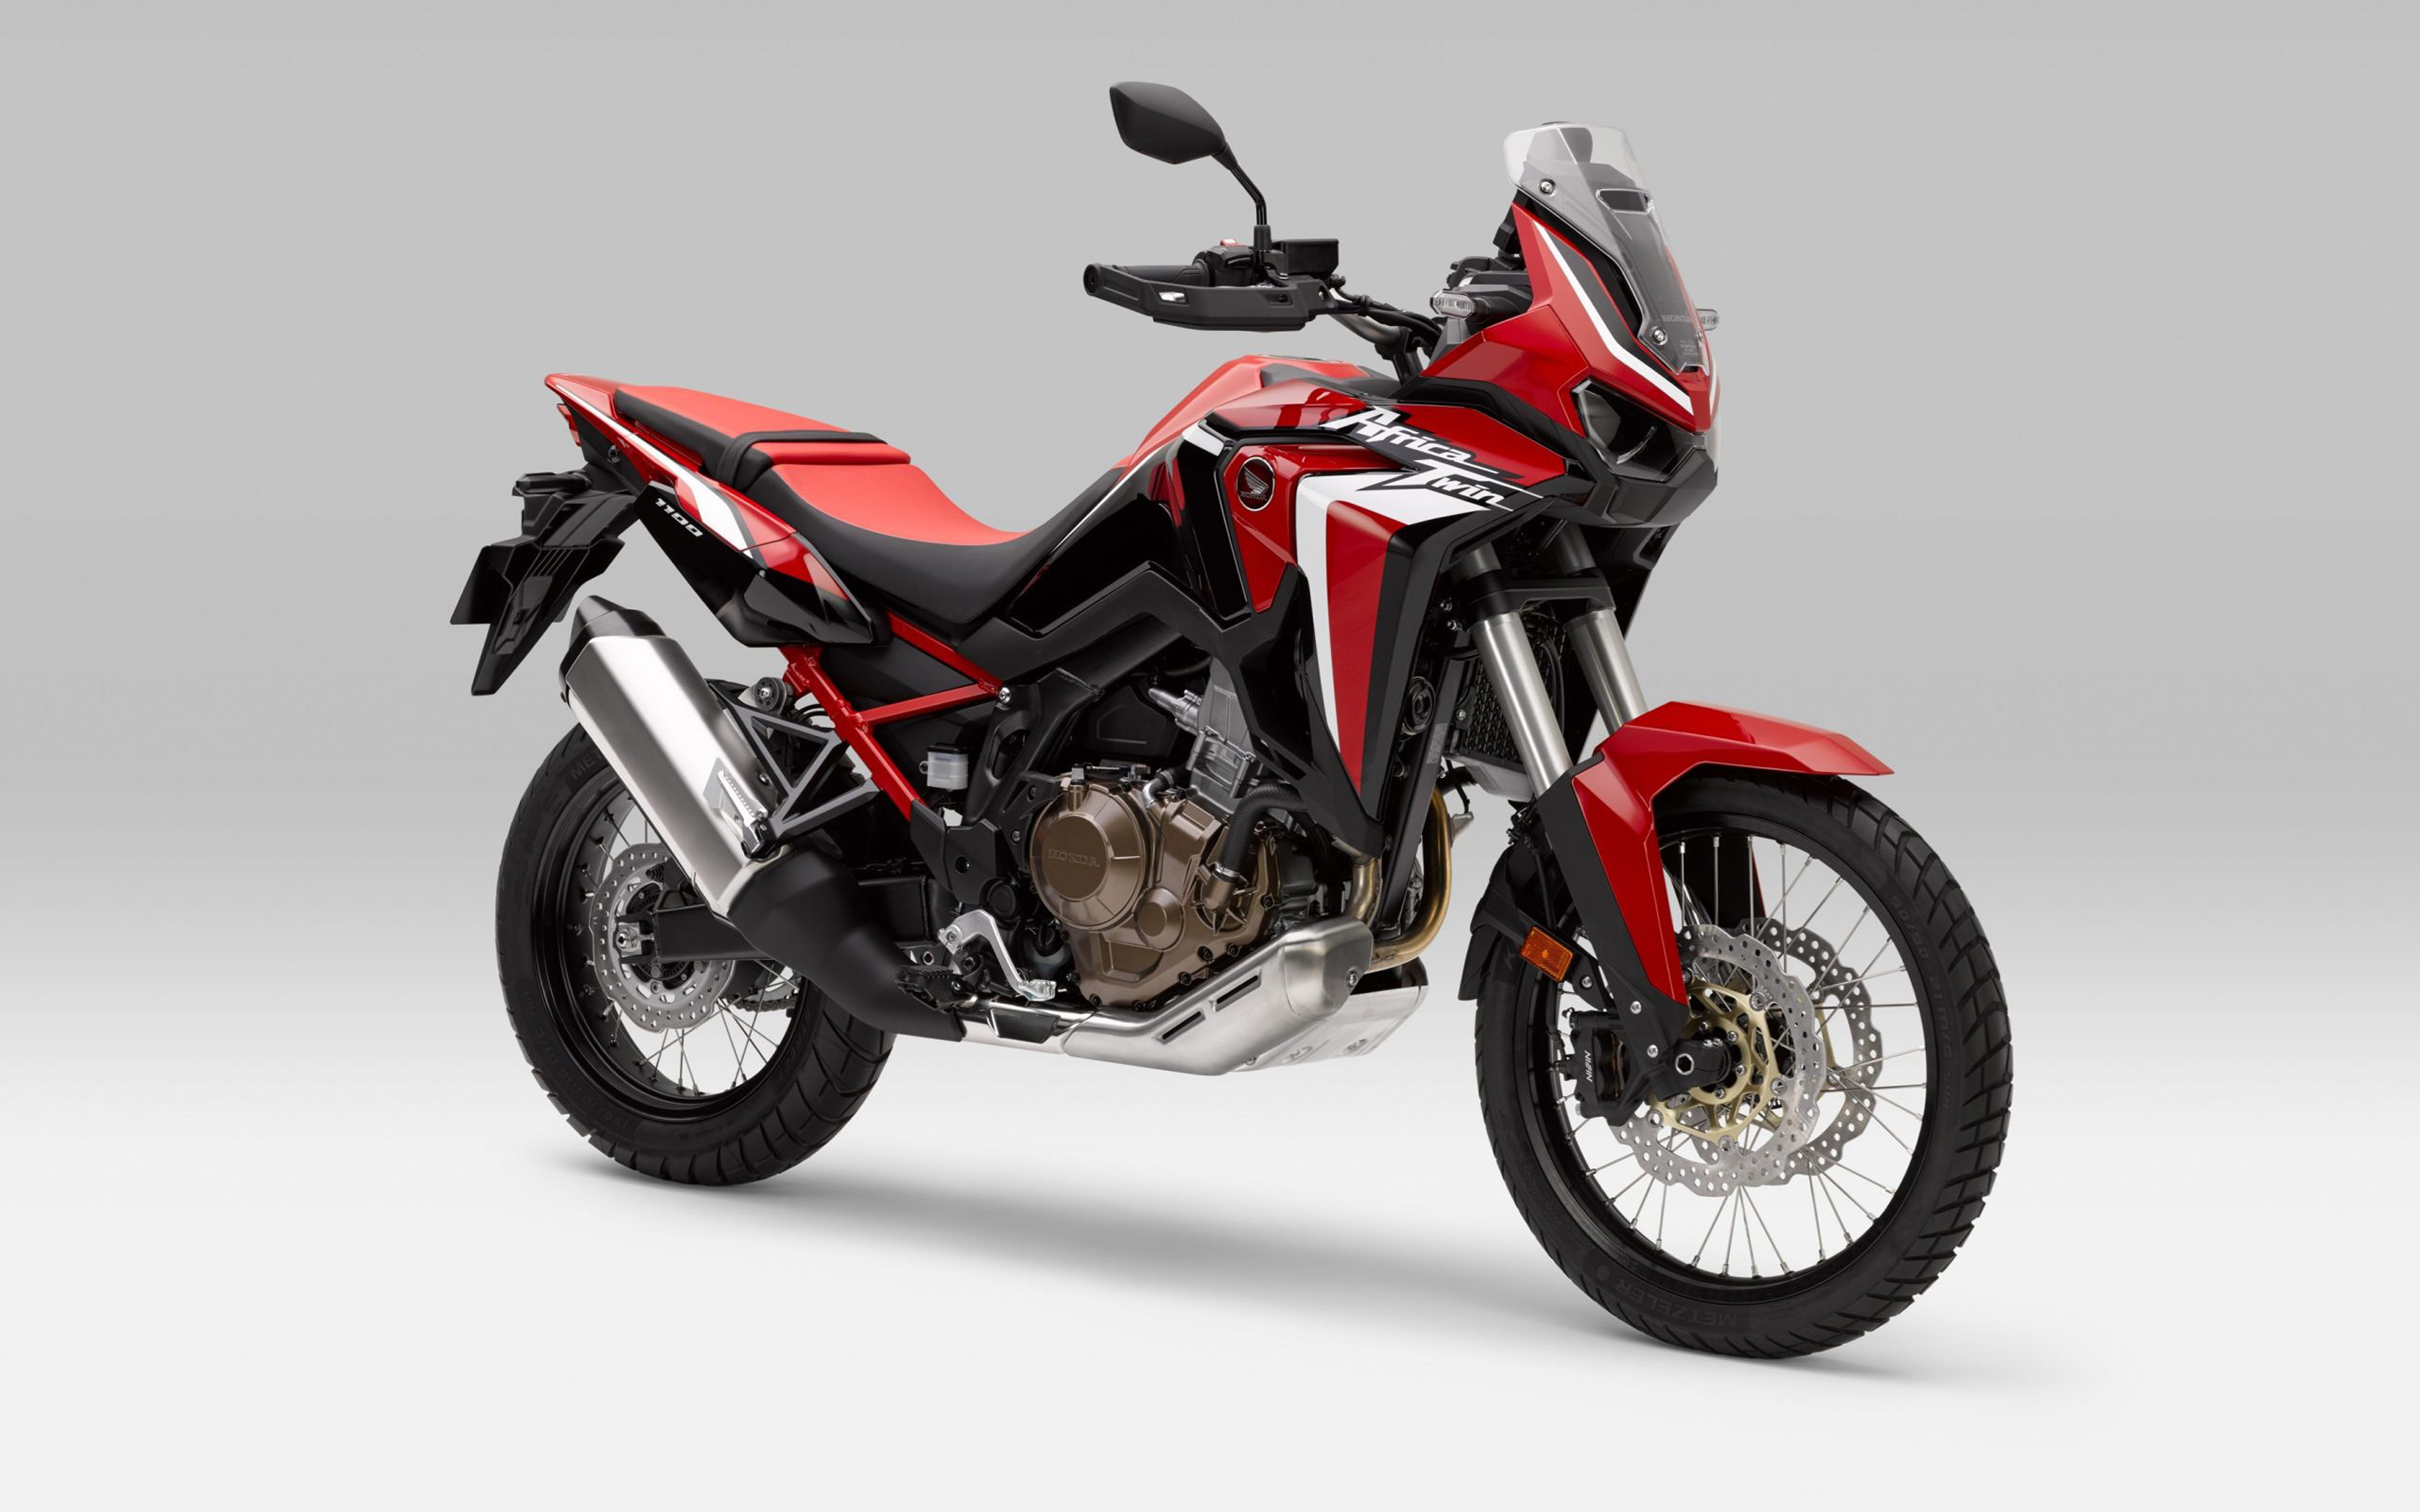 Honda Africa Twin, 2021 model, Exterior front view, High-quality pictures, 2880x1800 HD Desktop